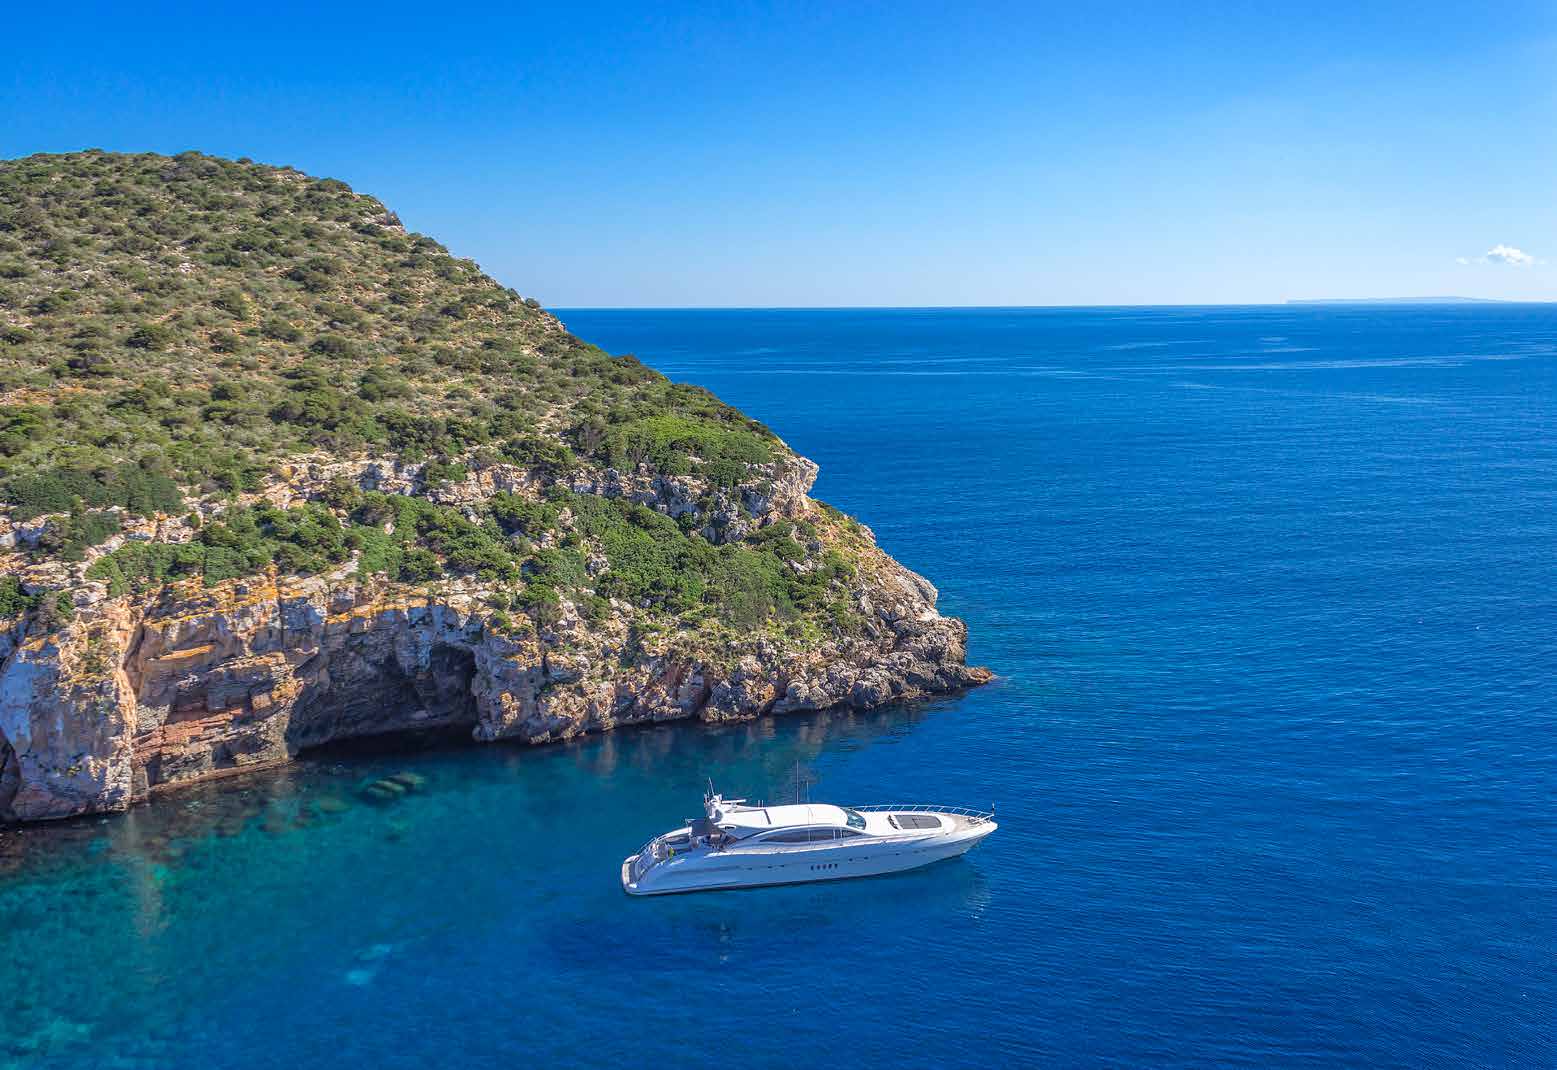 Protected: Private Island in the Mediterranean